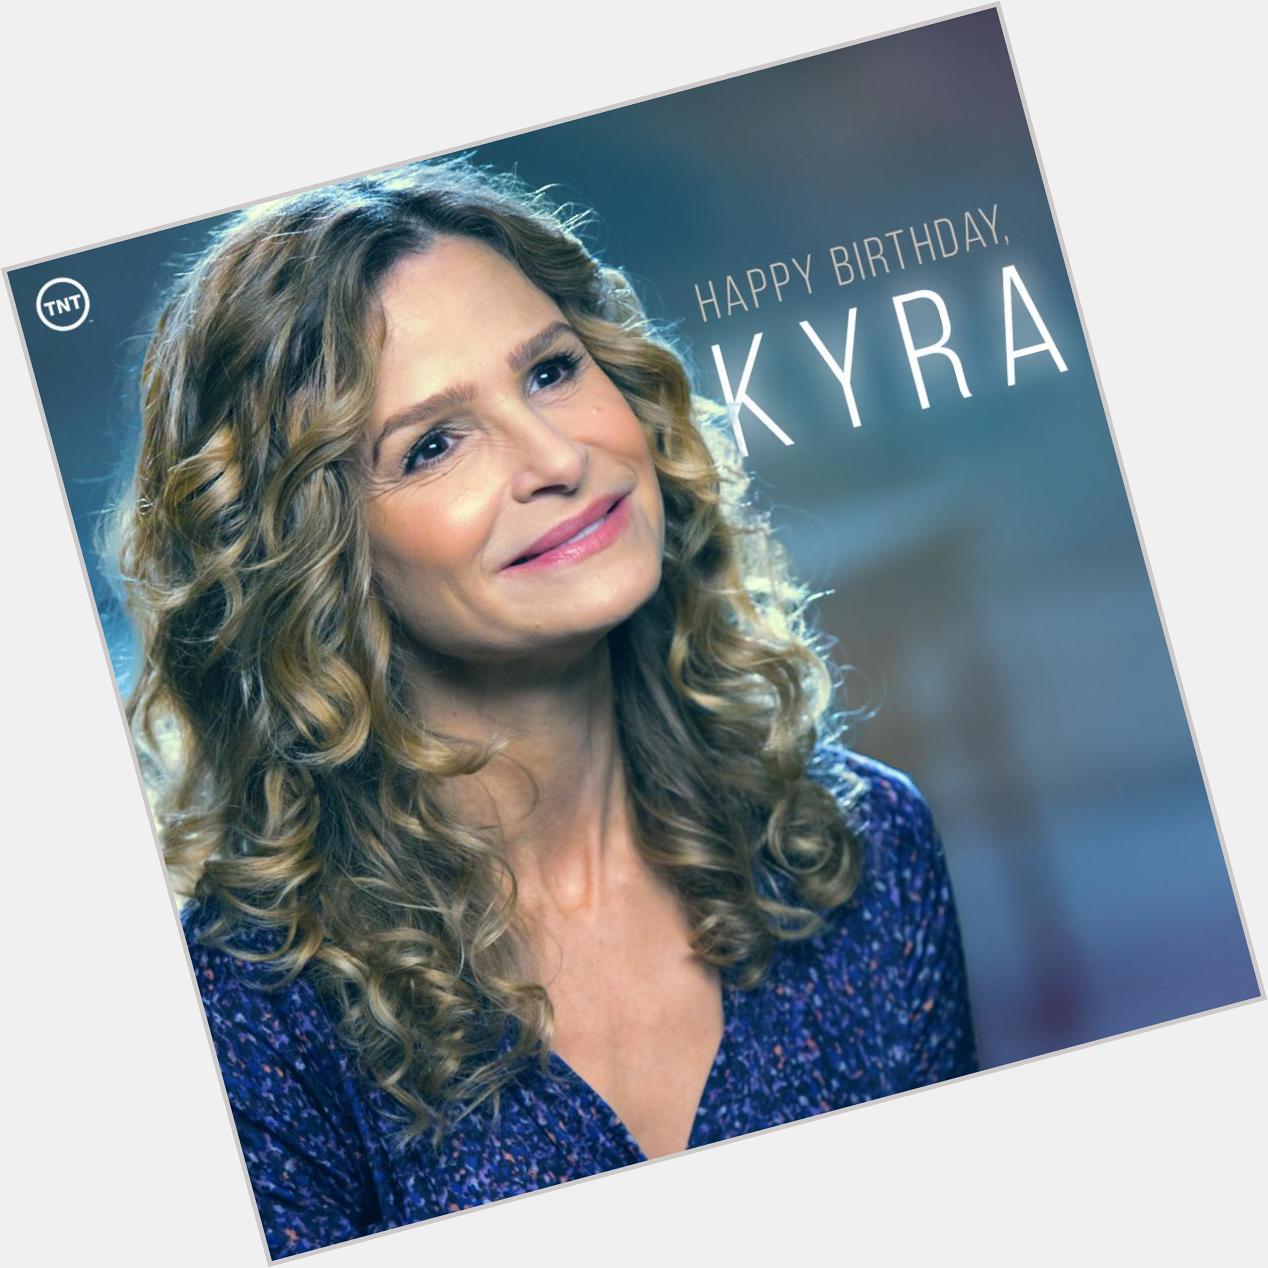 Happy Birthday, Kyra Sedgwick! From The Closer to Proof, we re happy to have you in the TNT family. 